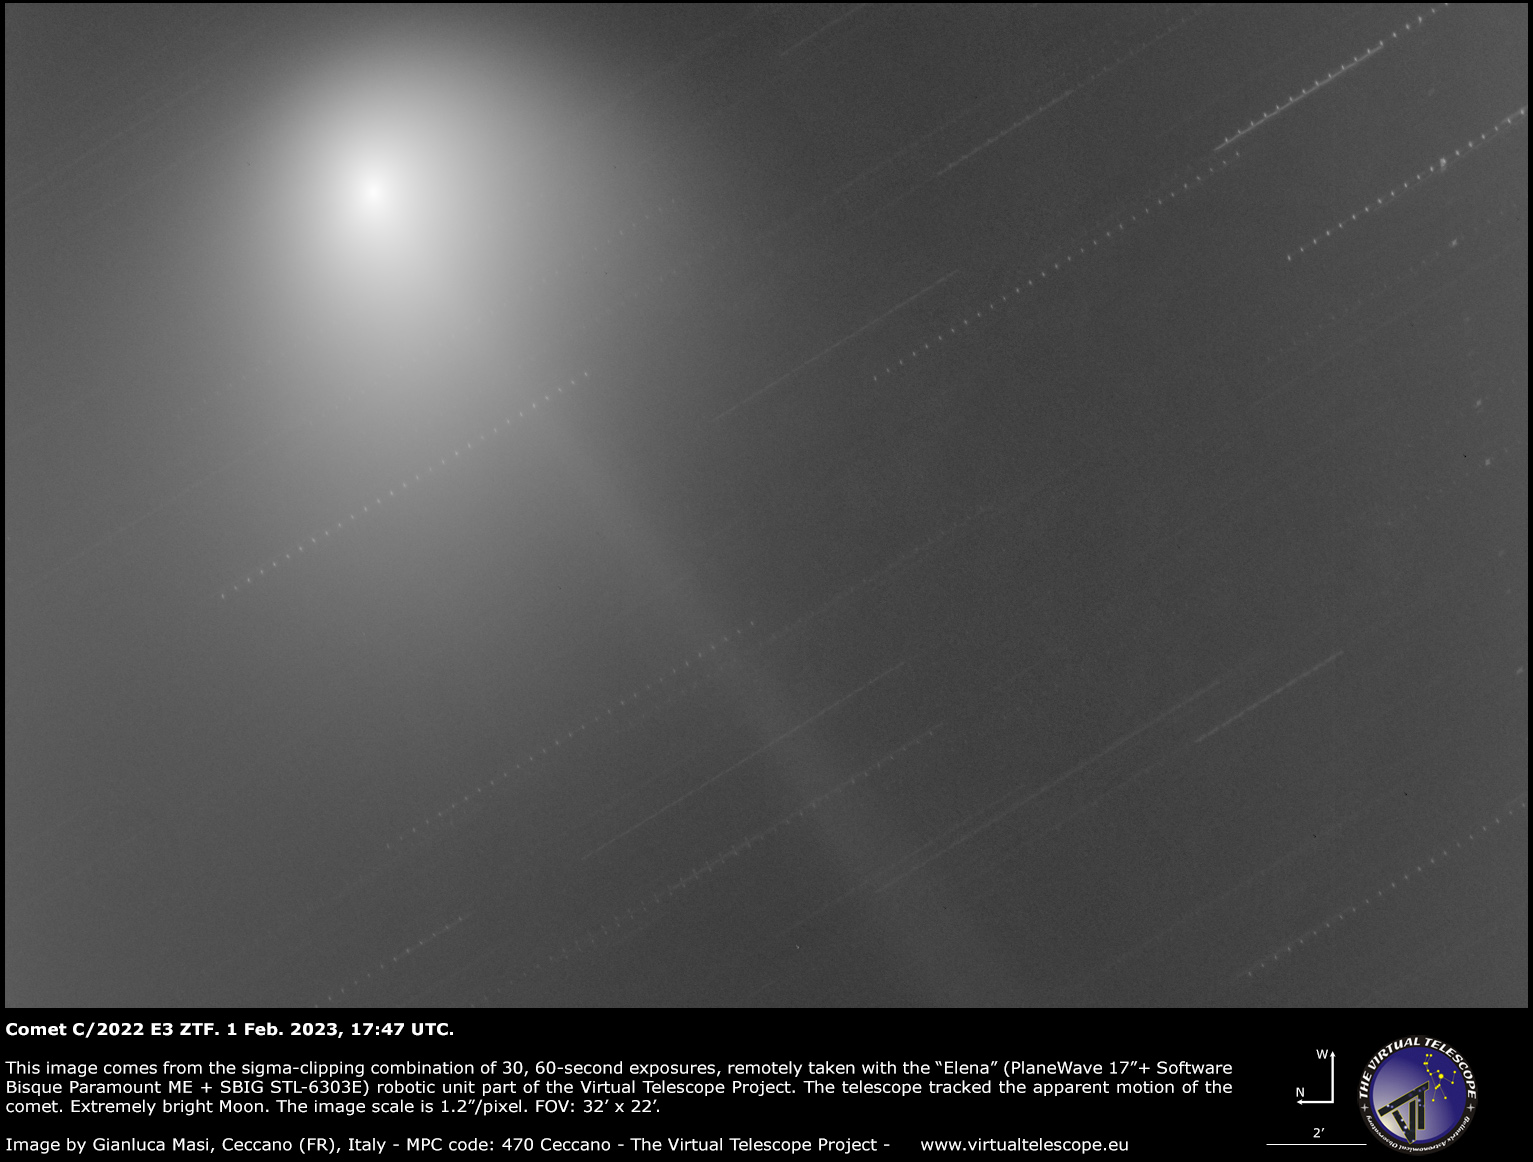 Comet C/2022 E3 ZTF at minimum distance from the Earth. 1 Feb. 2023.